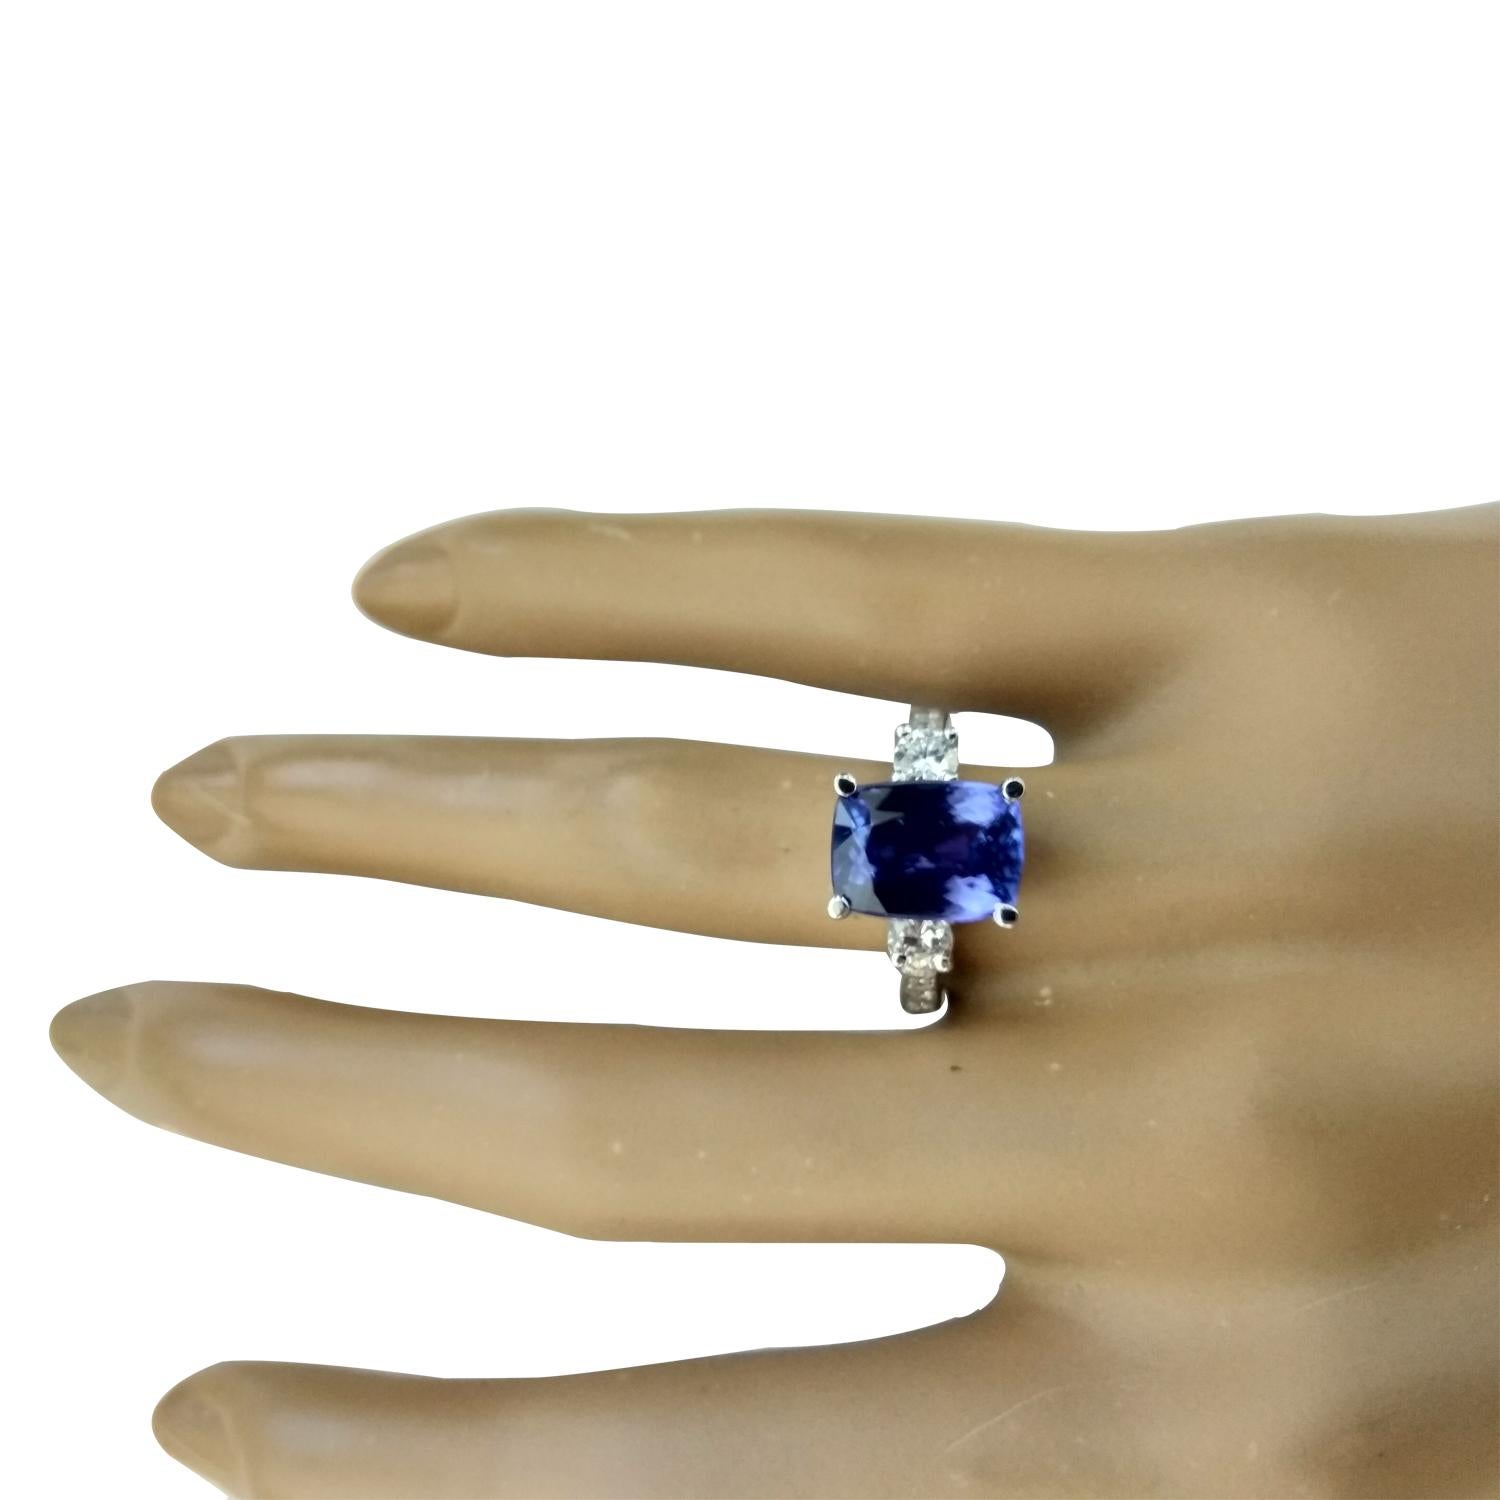 5.40 Carat Natural Tanzanite 14 Karat Solid White Gold Diamond Ring
Stamped: 14K 
Total Ring Weight: 4.8 Grams
Tanzanite Weight 4.40 Carat (10.00x8.00 Millimeters)
Diamond Weight: 1.00 carat (F-G Color, VS2-SI1 Clarity)
Quantity: 10
Face Measures: